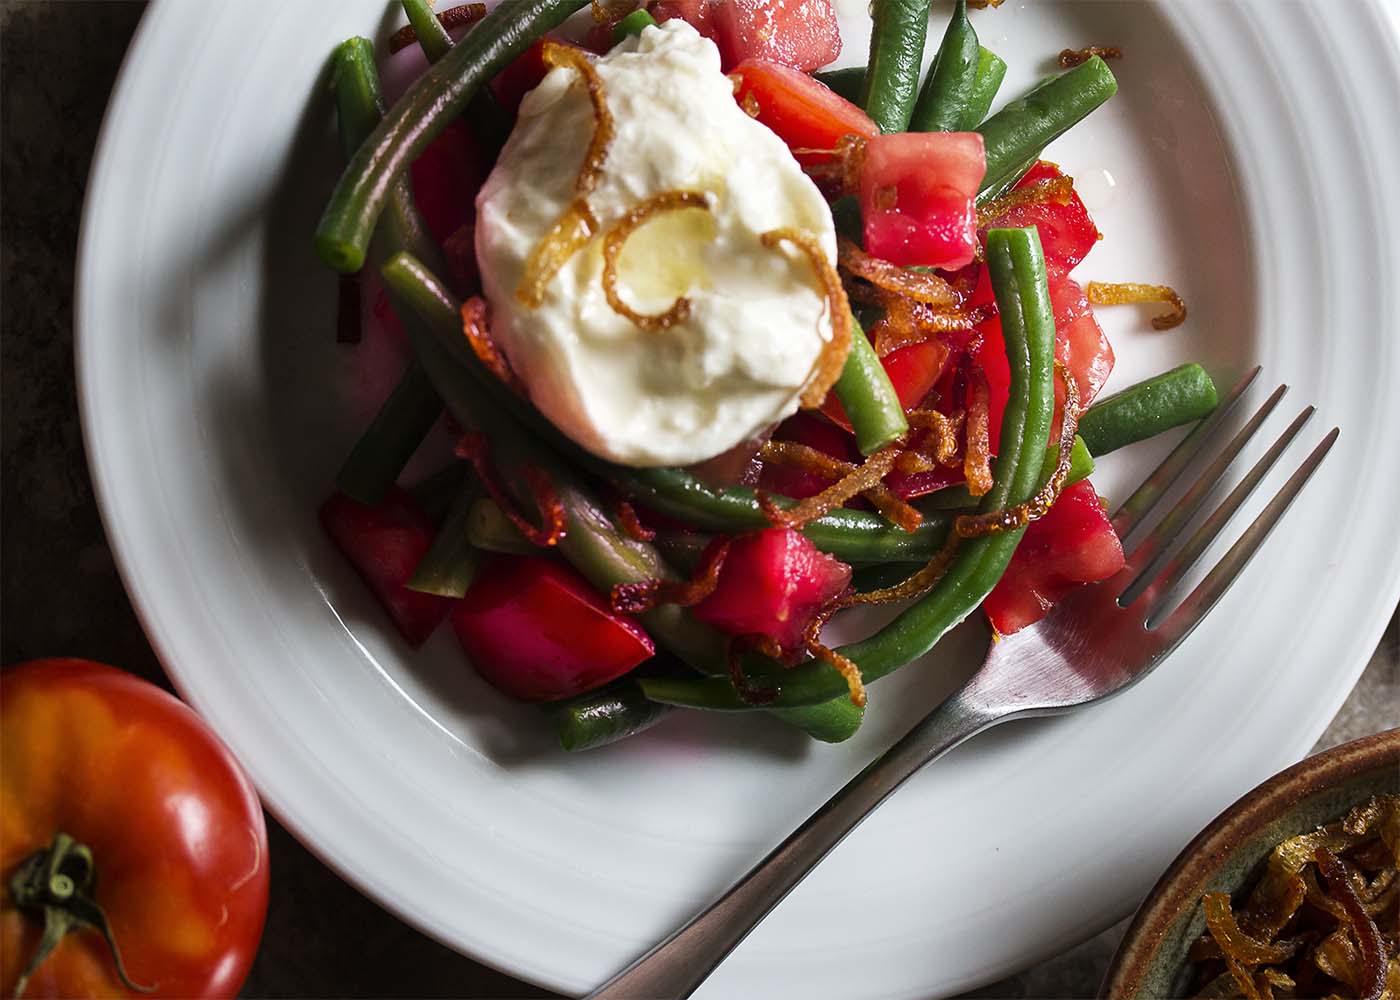 Creamy burrata, crispy shallots and ripe tomatoes along with fresh green beans give my Italian green bean salad plenty of flavor and balance. Add in a homemade Italian dressing and you'll want to make this salad every week! | justalittlebitofbacon.com